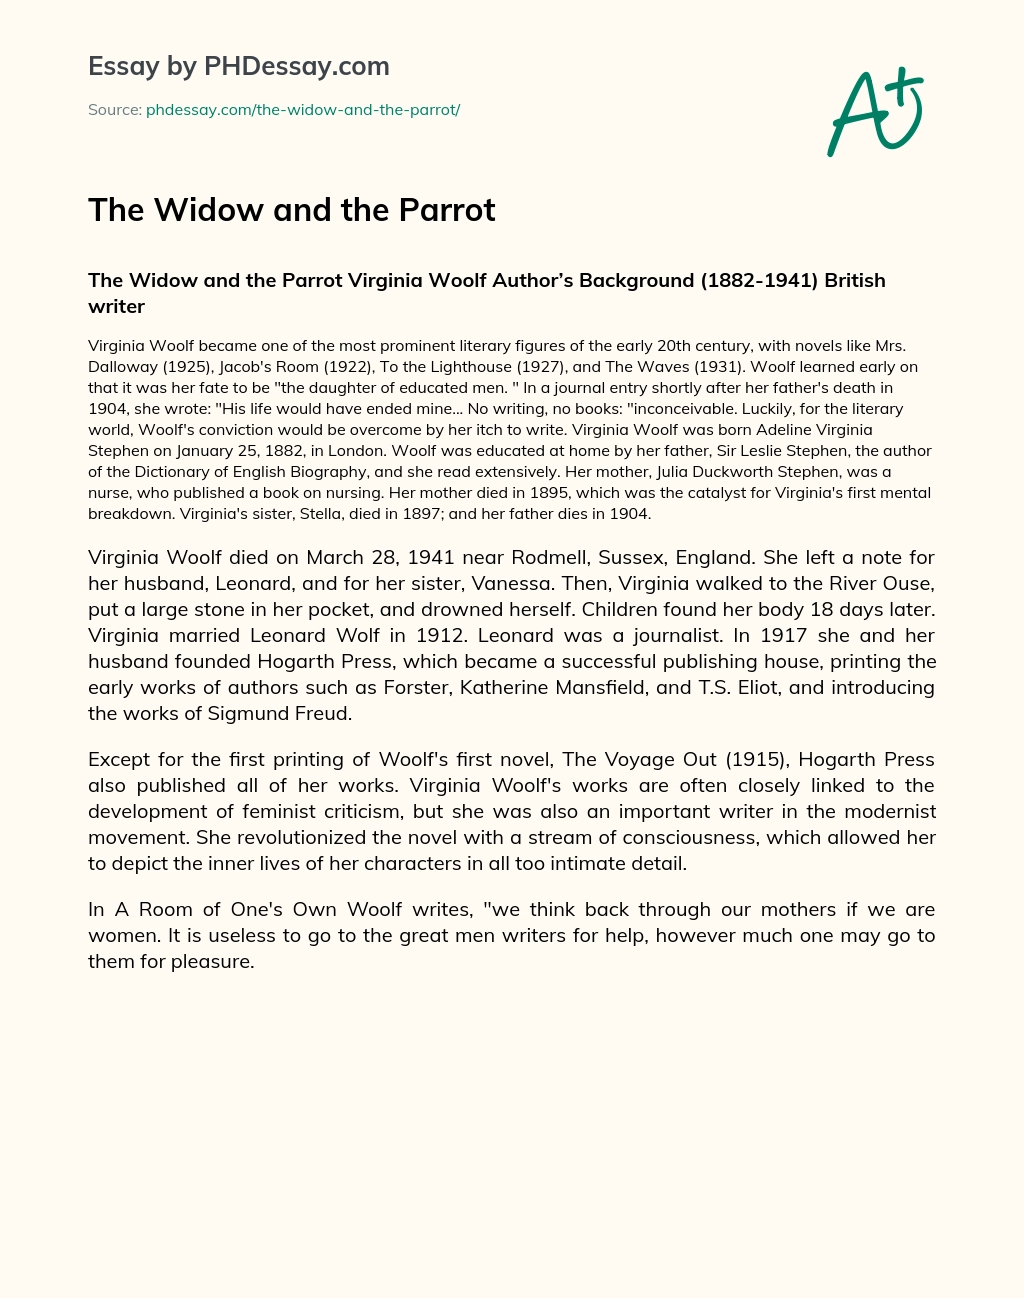 The Widow and the Parrot essay